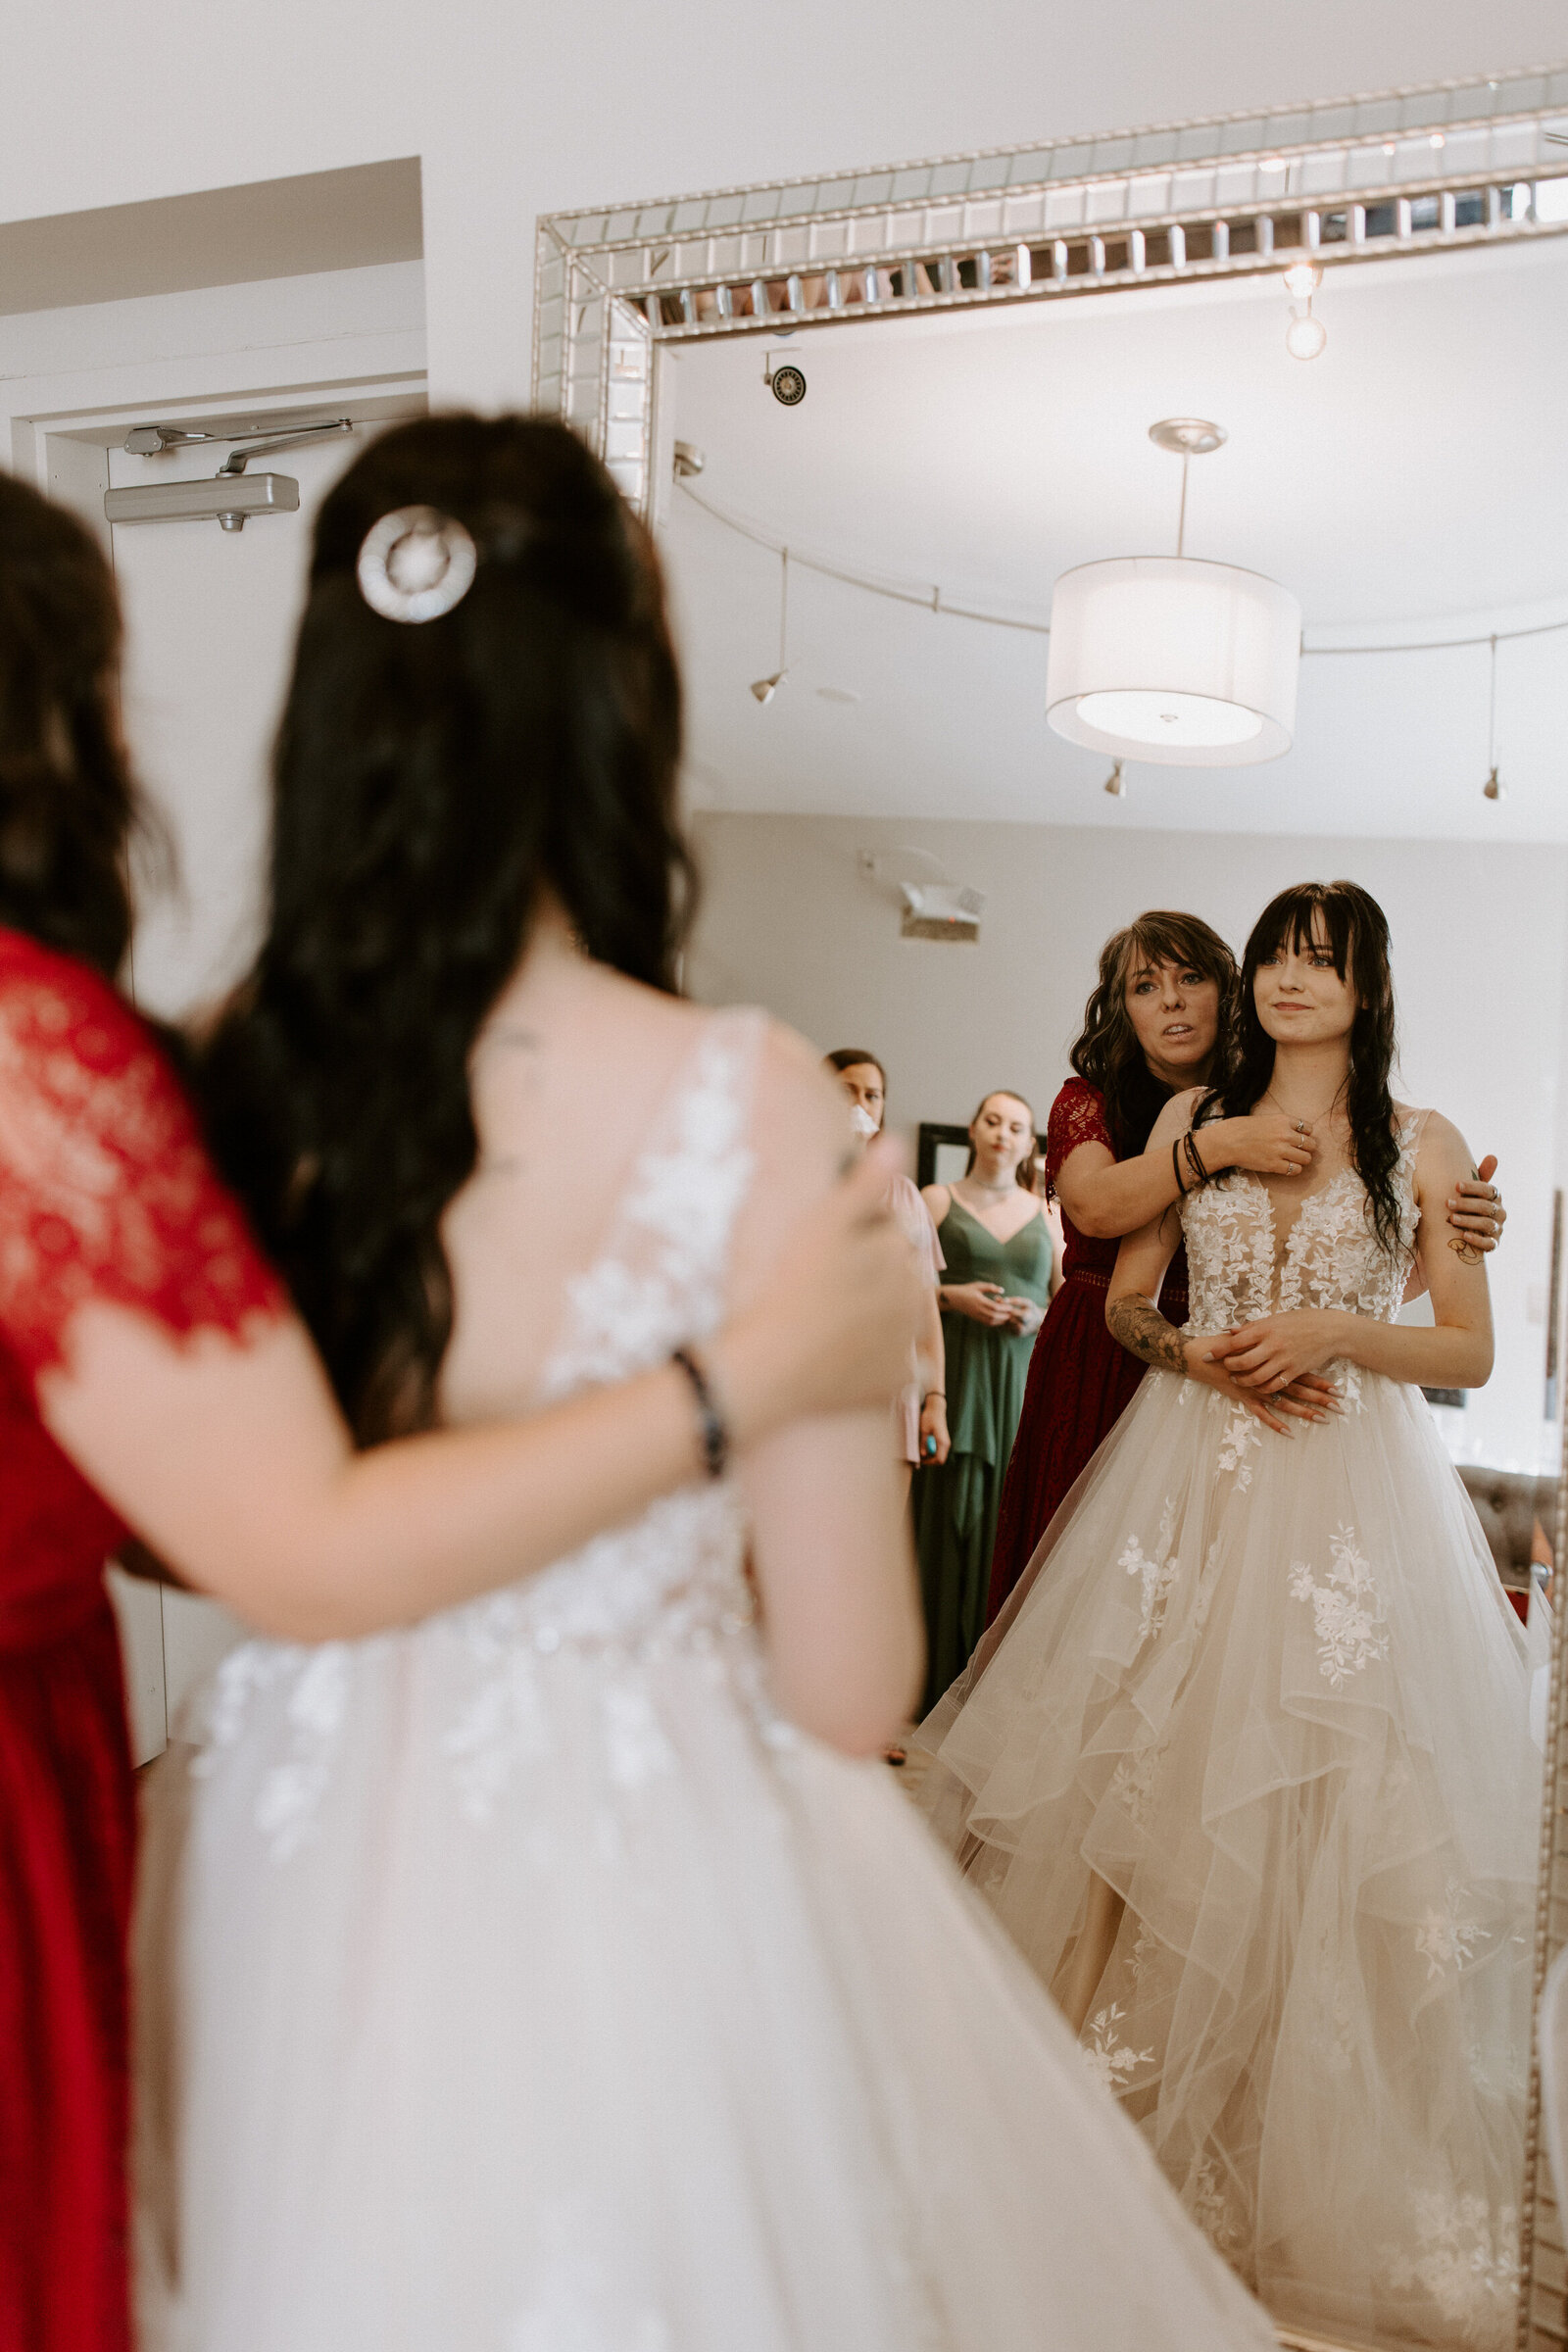 reflection of a woman adjusting a bride's dress